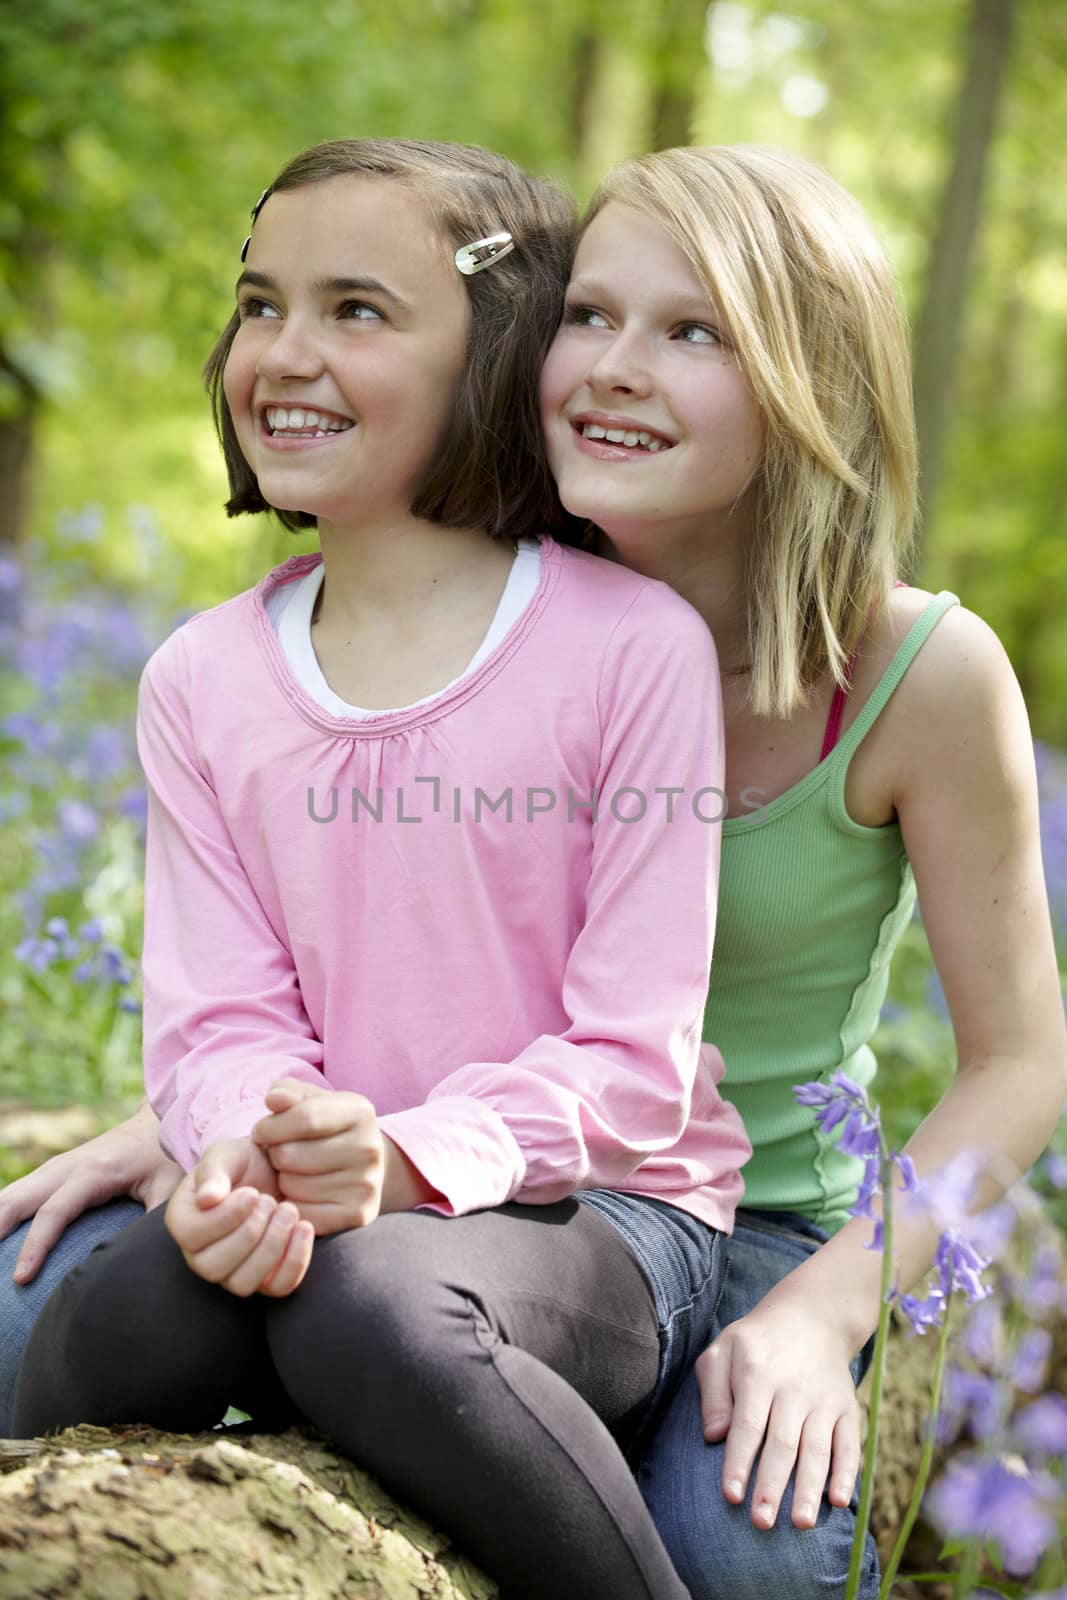 Two girls and bluebells by gemphotography